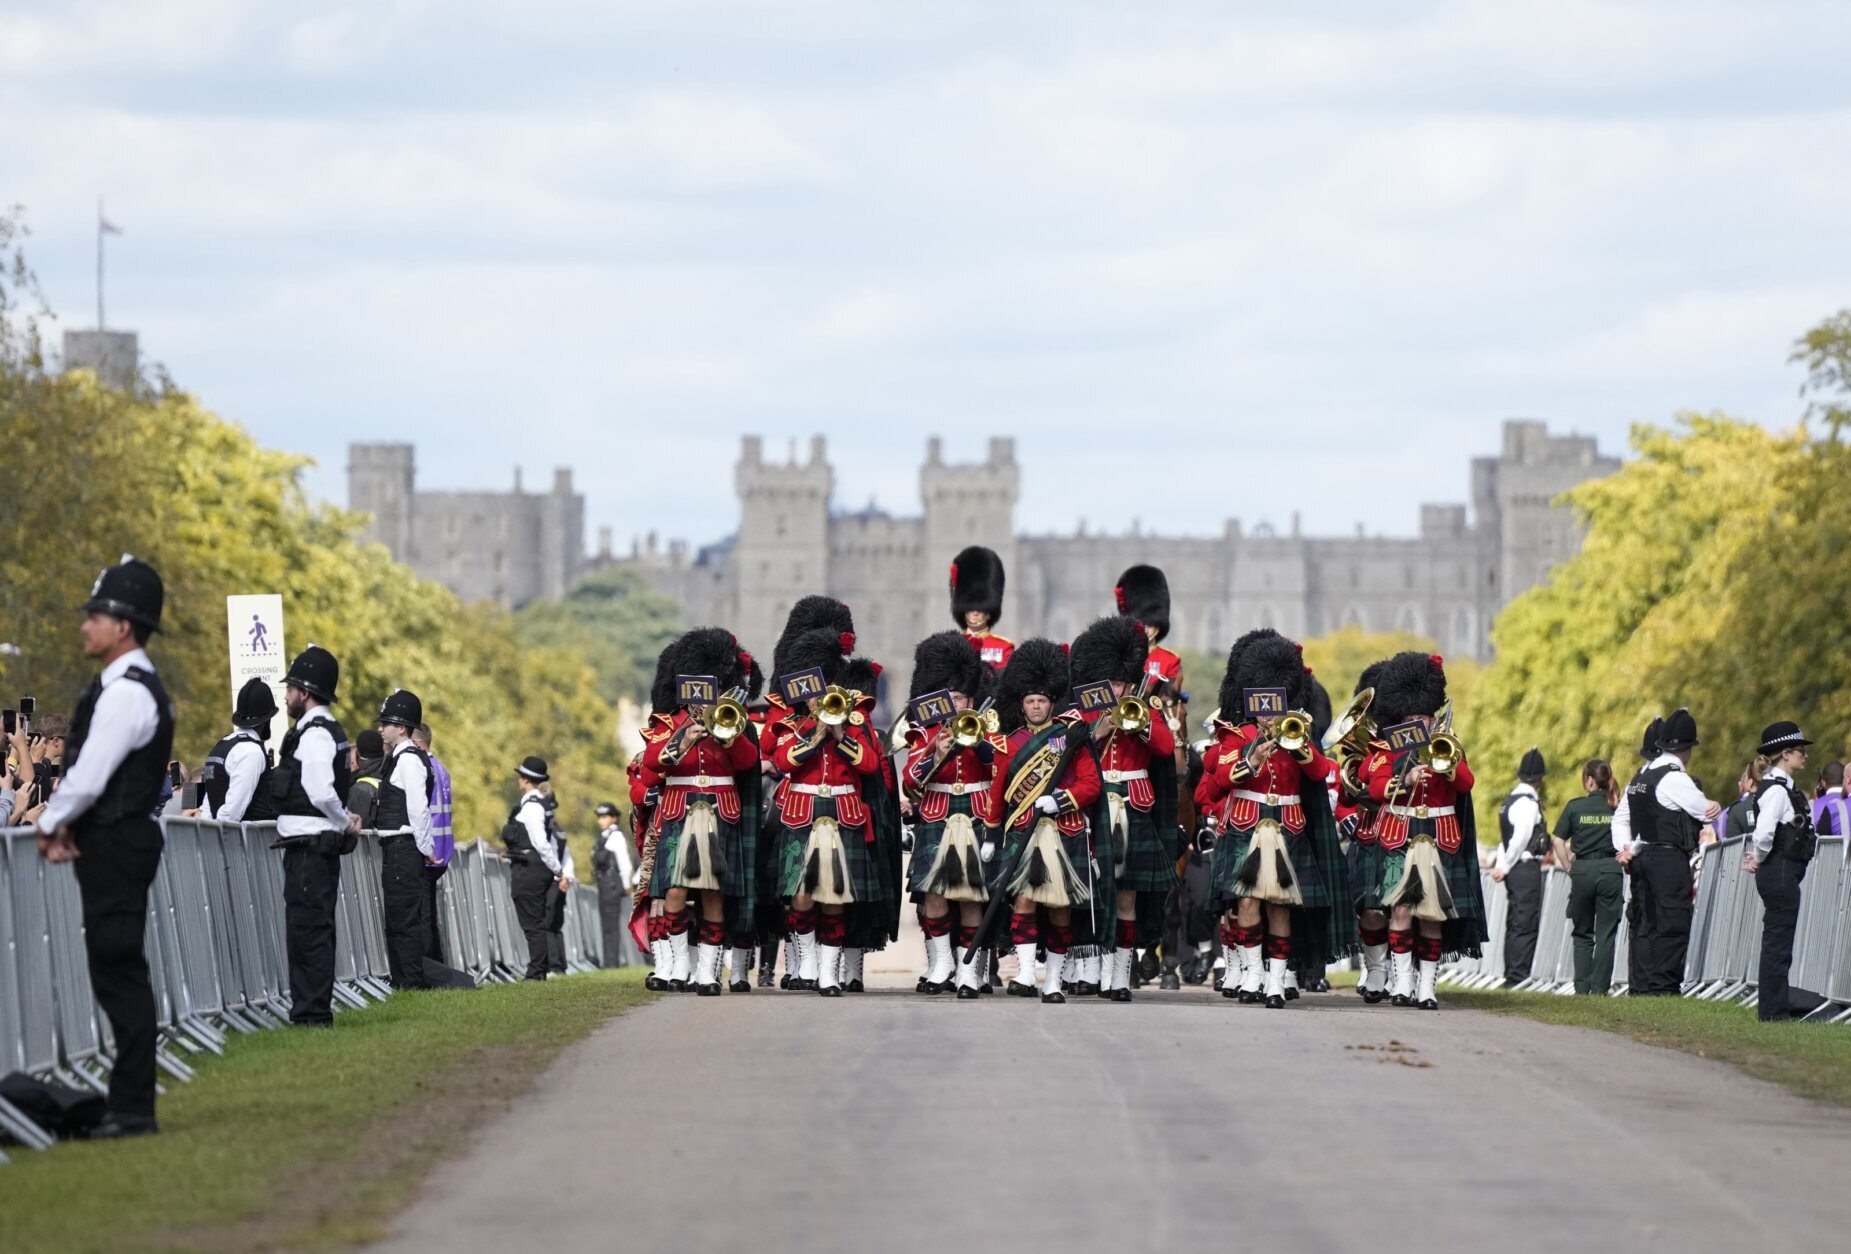 The Band of the Royal Regiment of Scotland plays ahead of the arrival of the coffin of Queen Elizabeth II outside Windsor Castle in Windsor, England, Monday, Sept. 19, 2022. The Queen, who died aged 96 on Sept. 8, will be buried at Windsor alongside her late husband, Prince Philip, who died last year. (AP Photo/Alastair Grant, Pool)